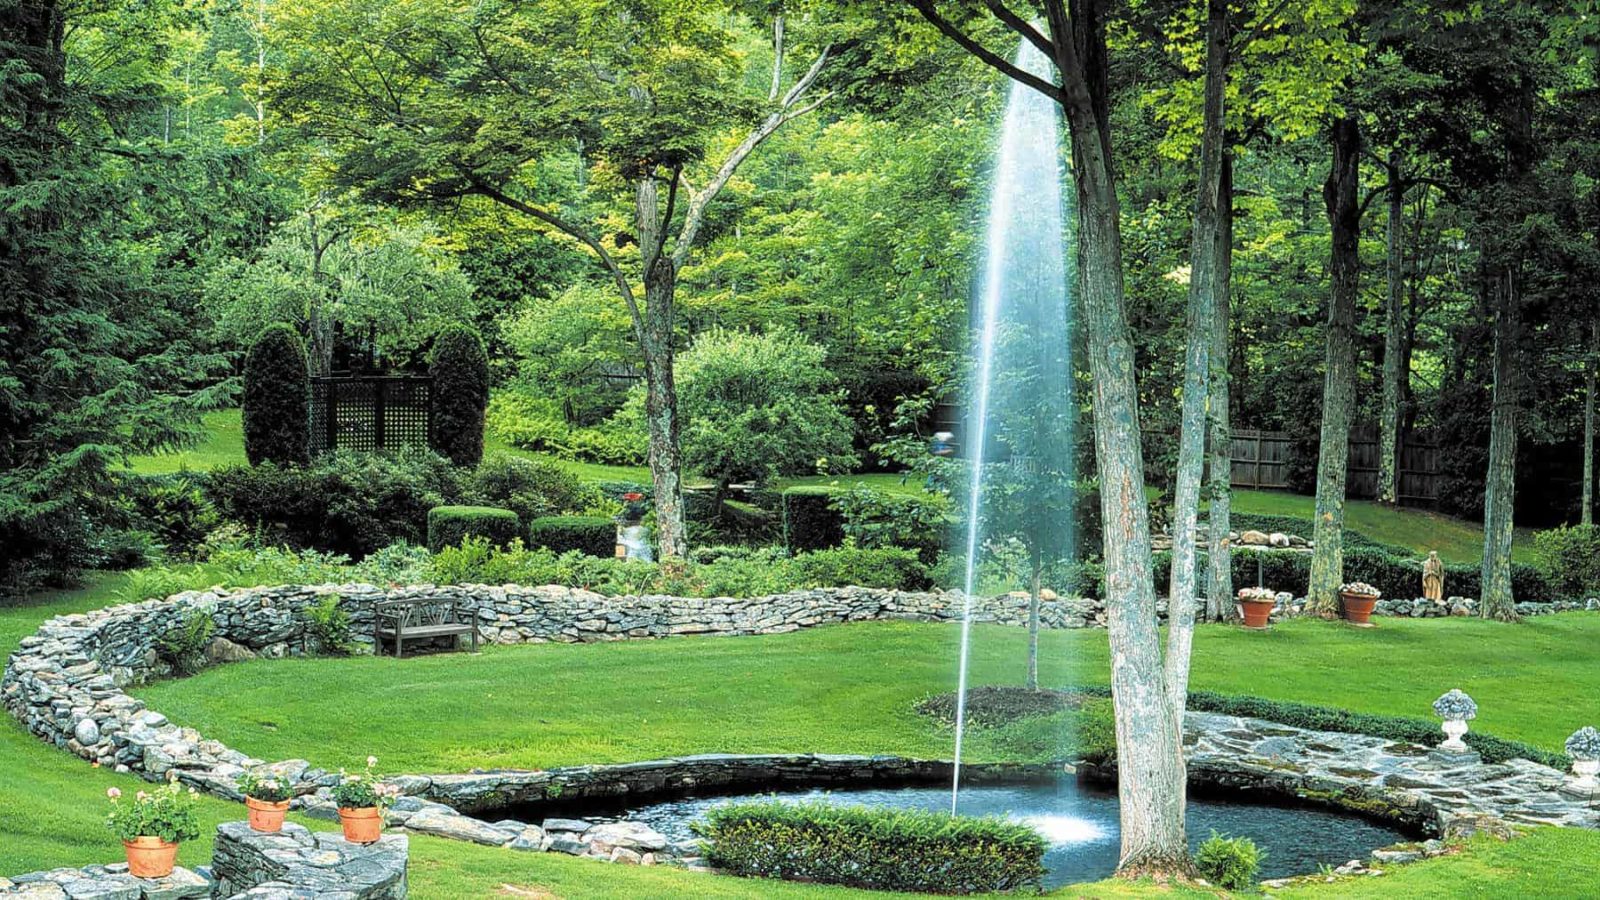 A fountain still plays in the gardens where the Gilded Age estate of Ashintully once stood.